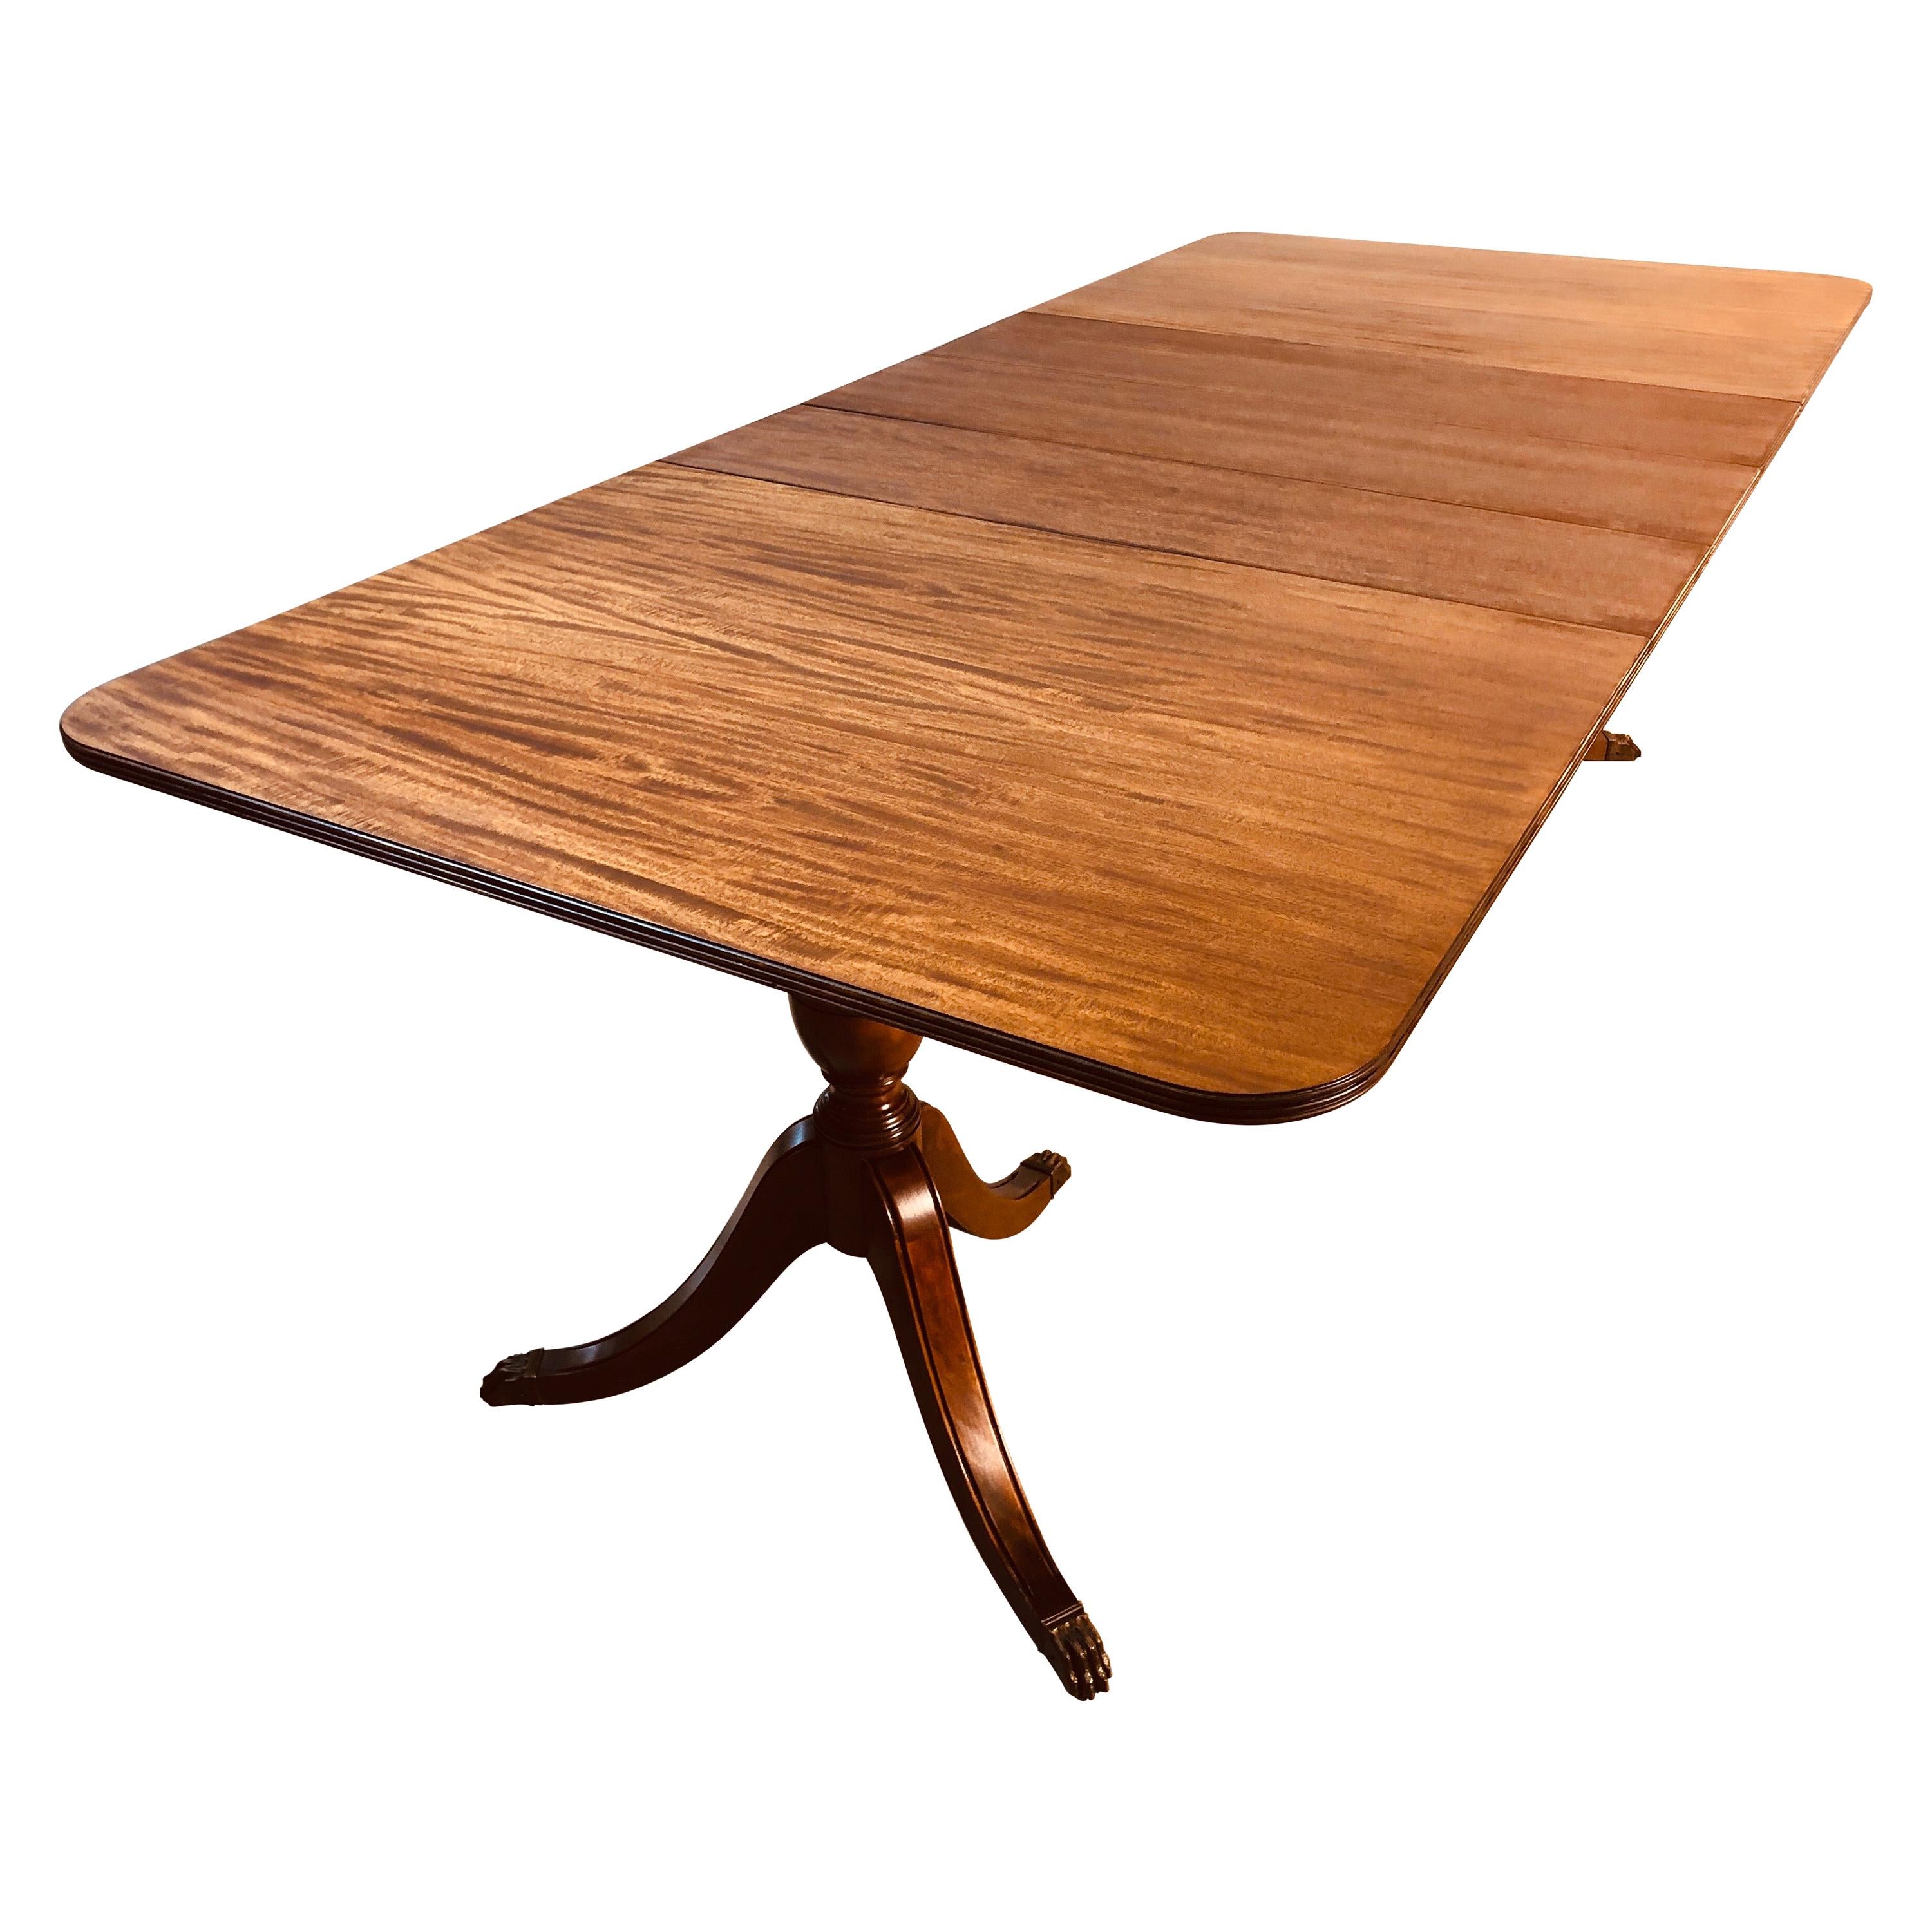 Vintage Mahogany Wood Dining Room Table For Sale